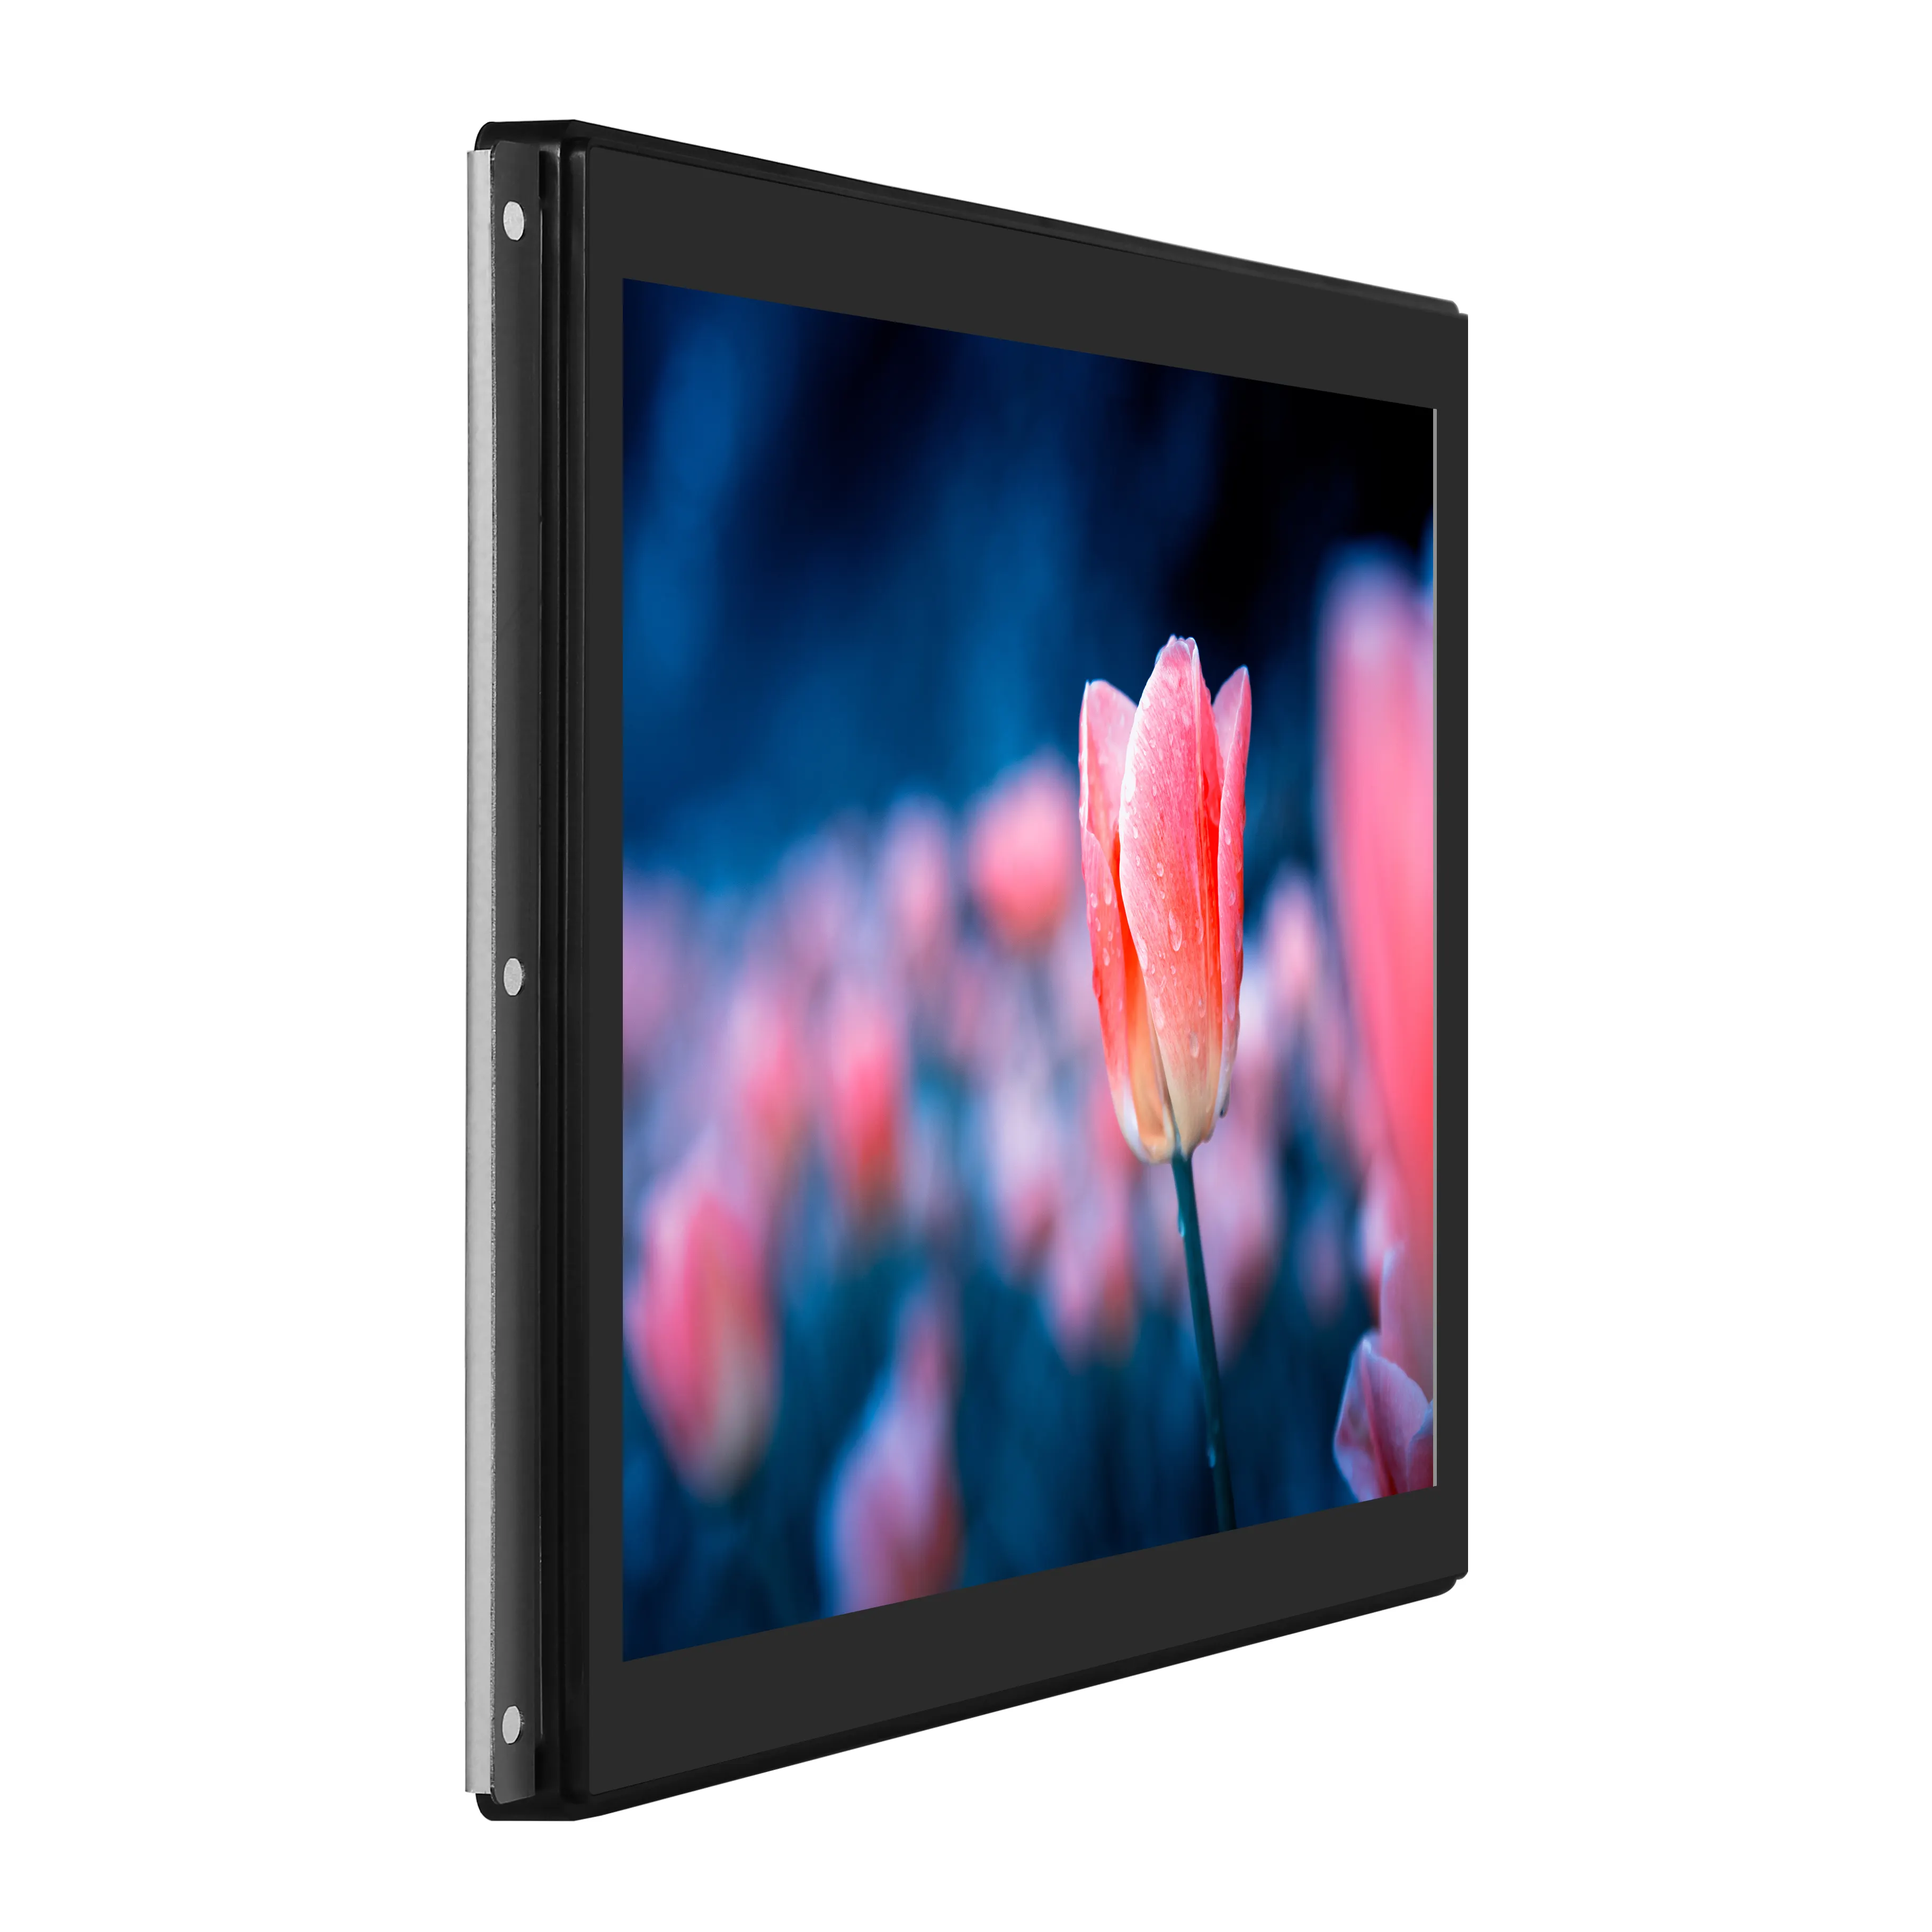 Bestview IP65 Waterproof Capacitive Open Frame Industrial Touchscreen LCD 185 inch Monitor